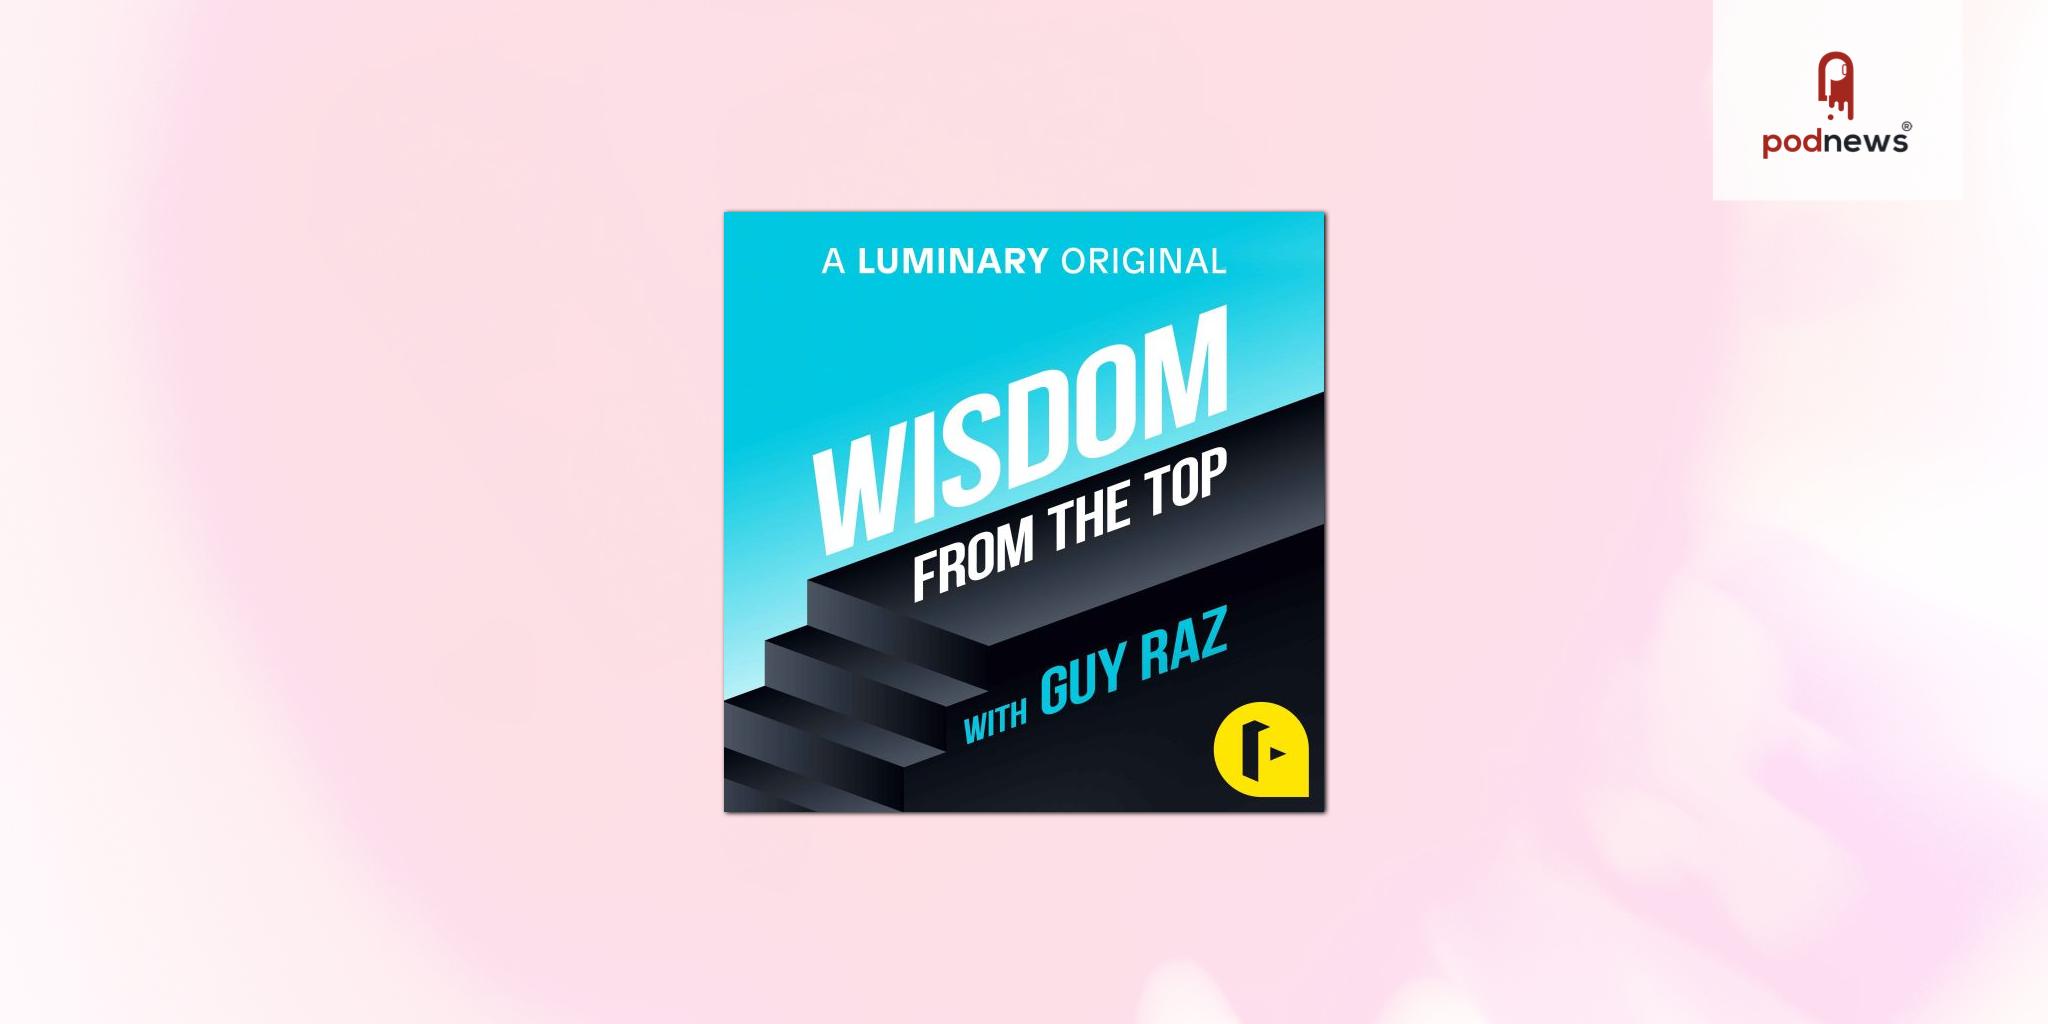 Luminary and NPR partner to bring Wisdom from the Top podcast with Guy Raz to global audiences